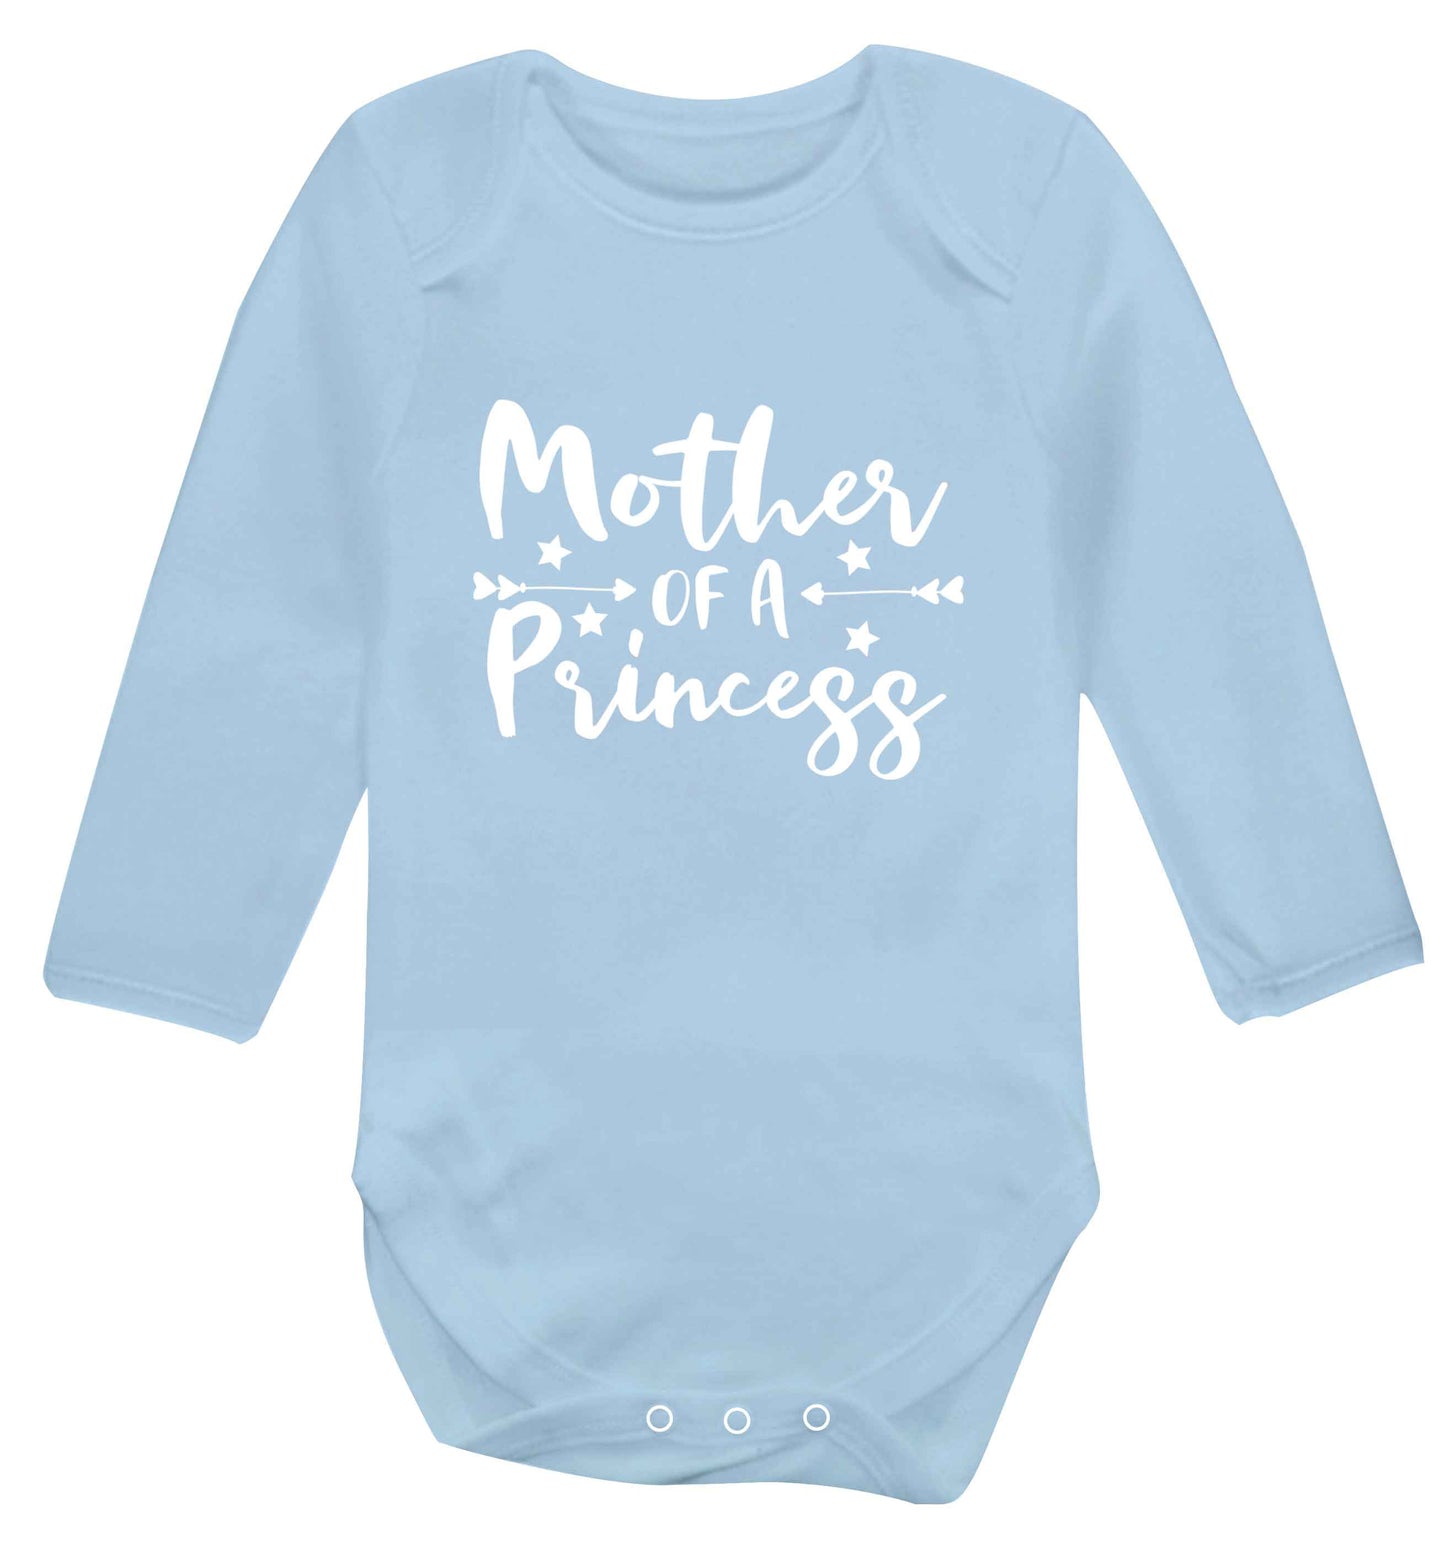 Mother of a princess baby vest long sleeved pale blue 6-12 months